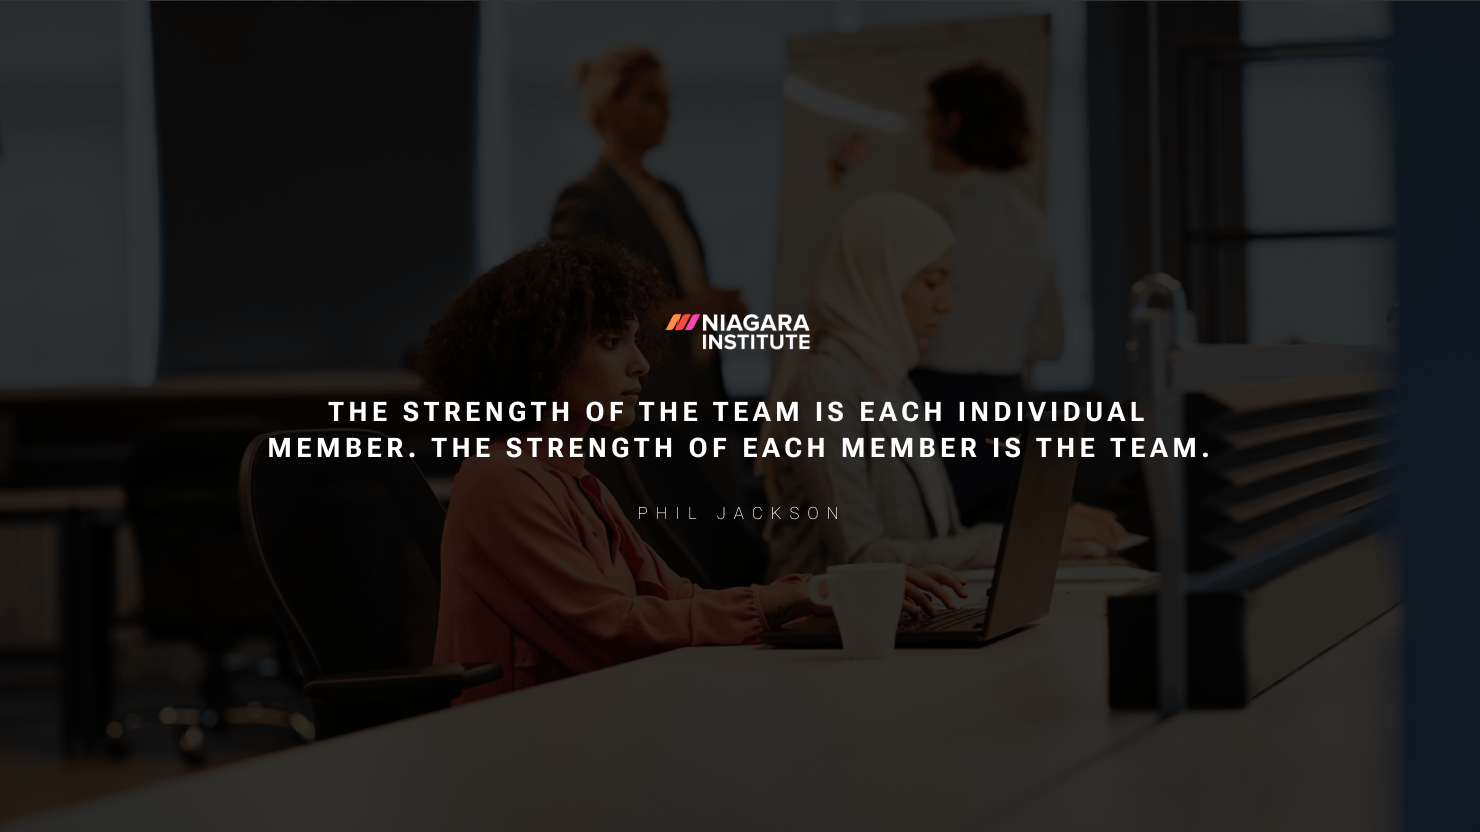 The strength of the team is each individual member. The strength of each member is the team